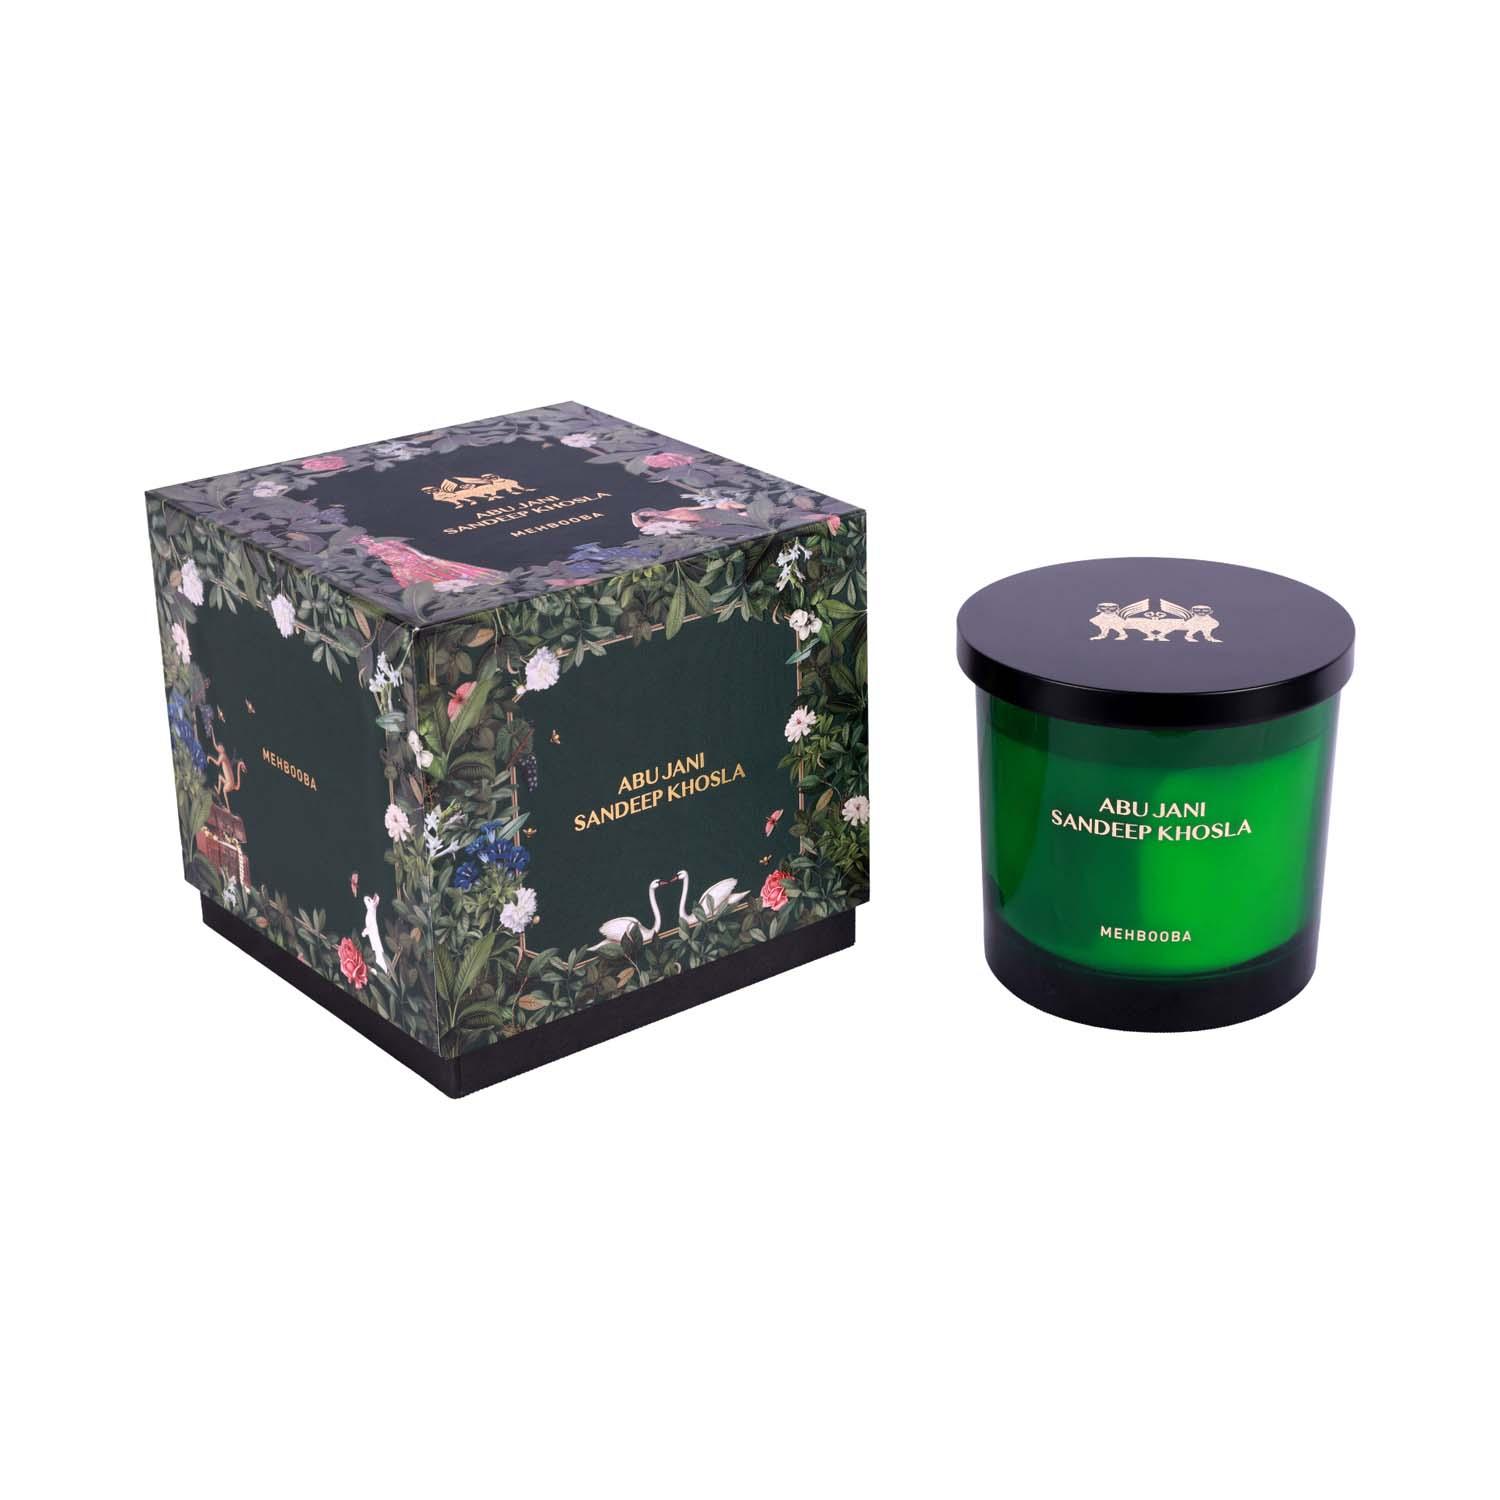 Abu Jani Sandeep Khosla | Abu Jani Sandeep Khosla - Mehbooba - Rose & Oud Candle (180g)